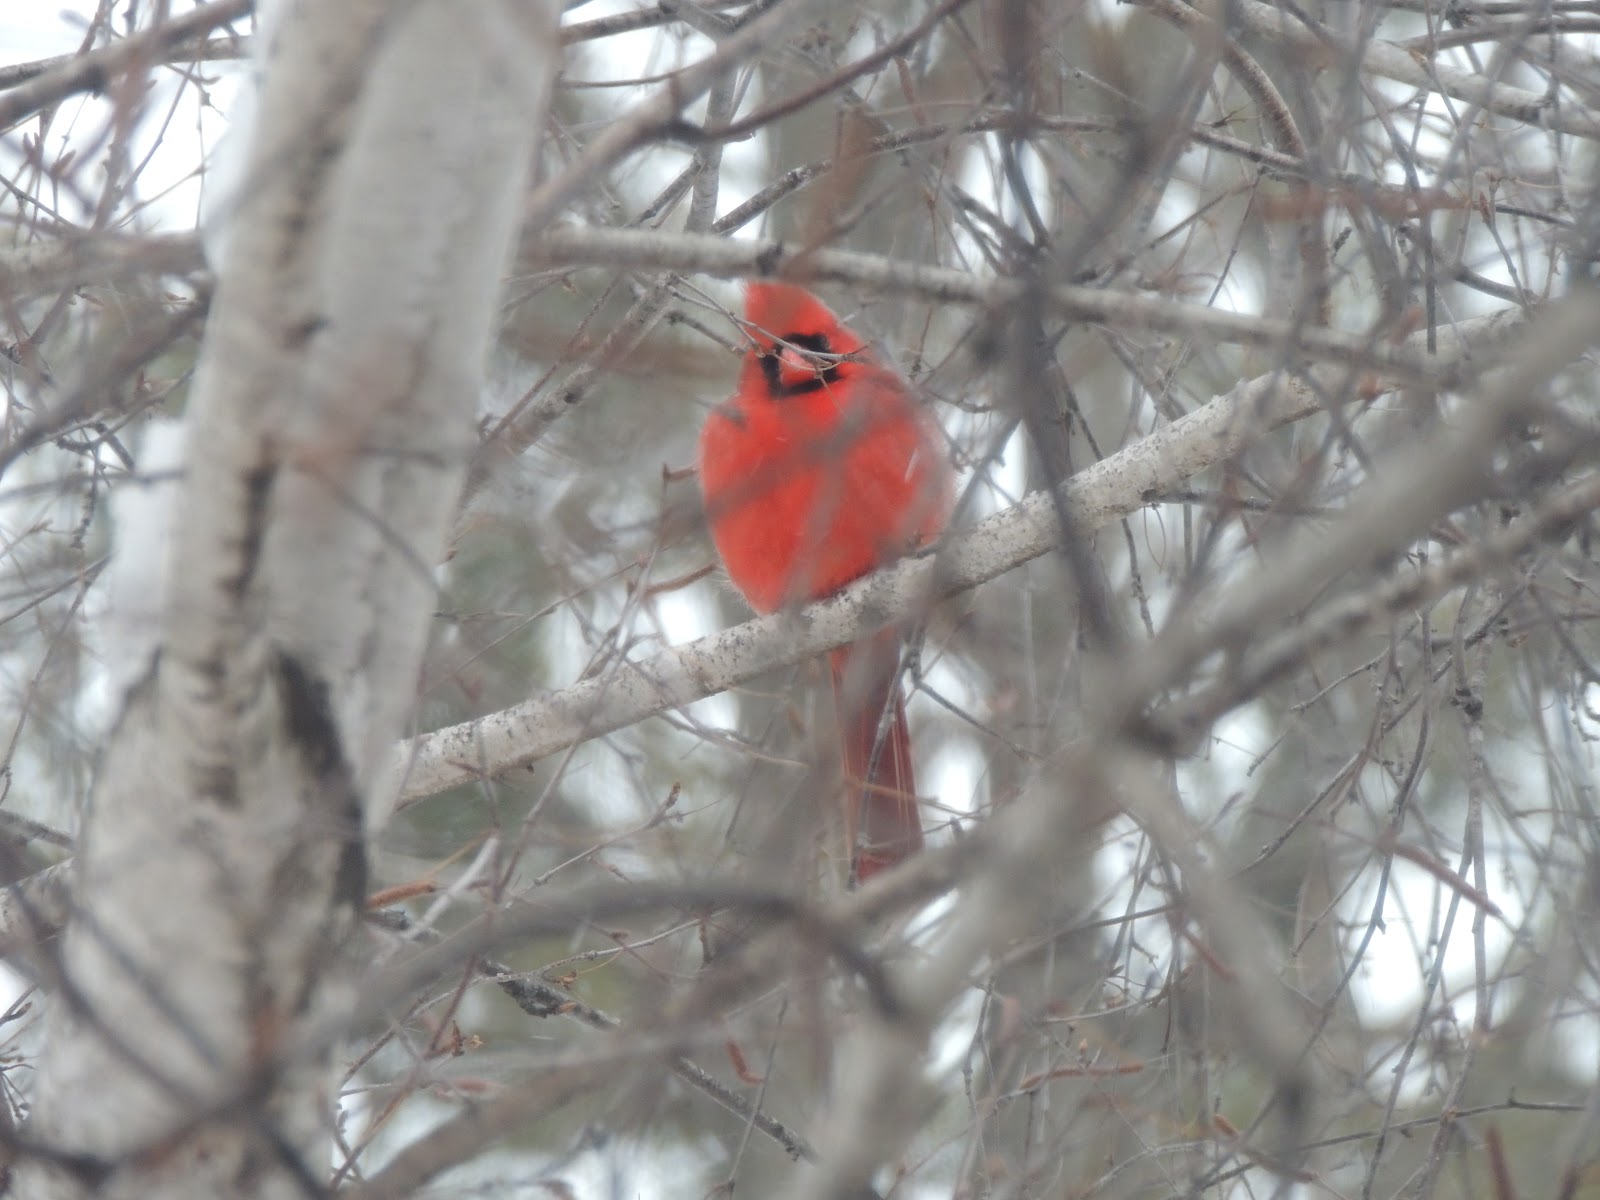 Have enjoyed the cardinal that has perched in the trees outside my window.